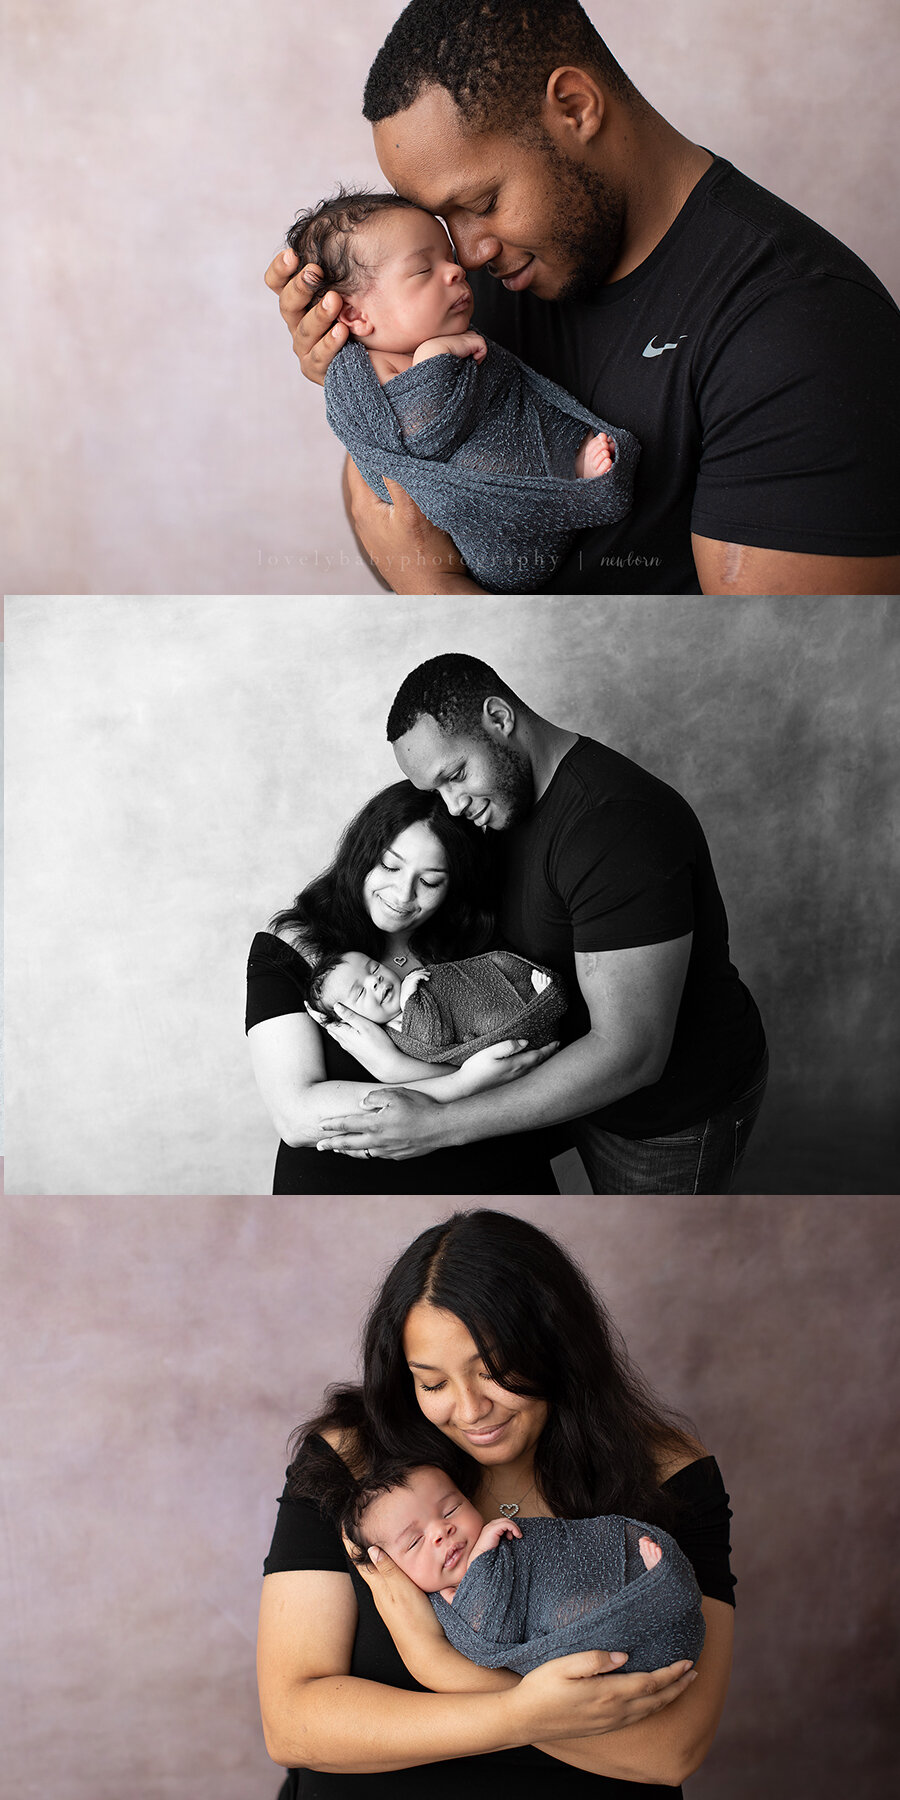 Details more than 143 baby shoot poses super hot